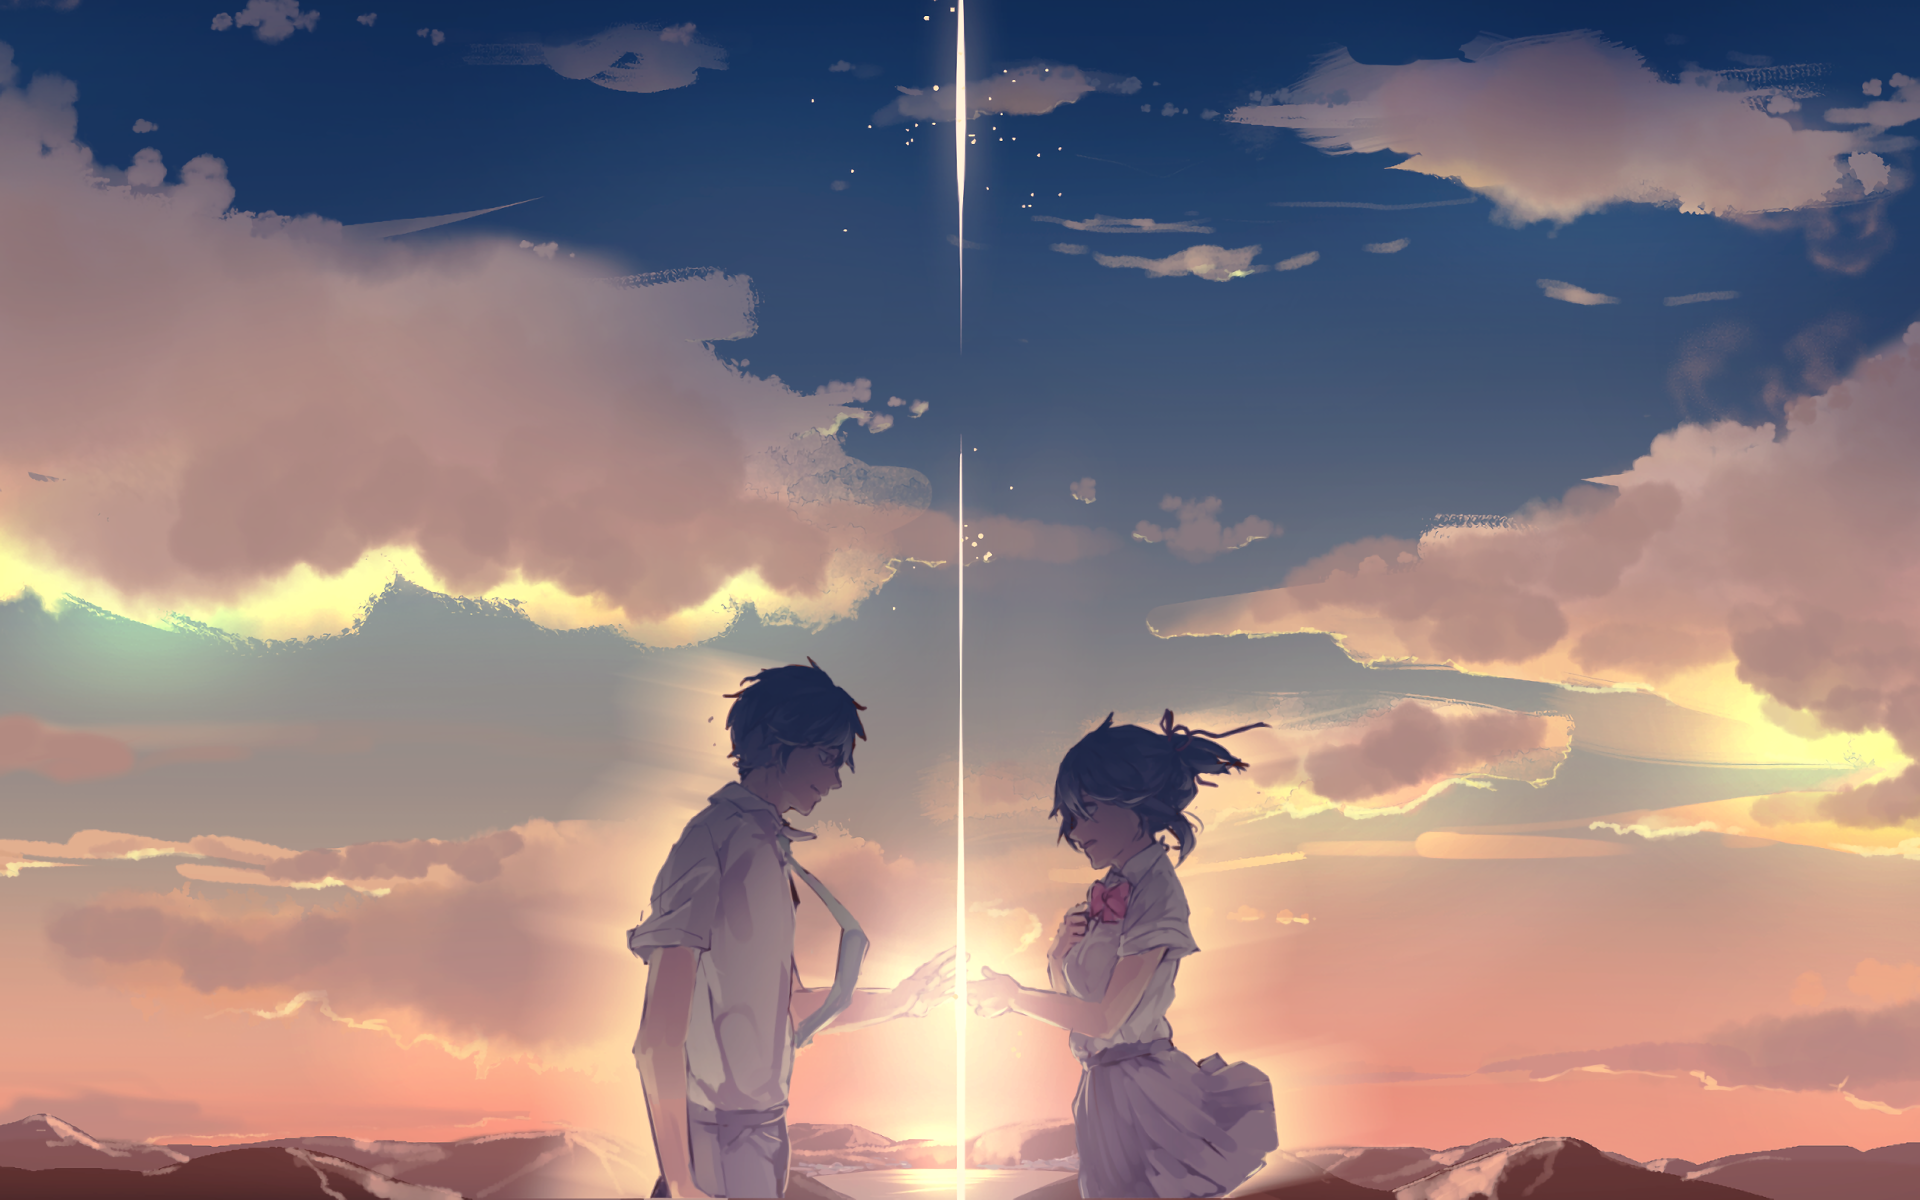 1380 Your Name. HD Wallpapers